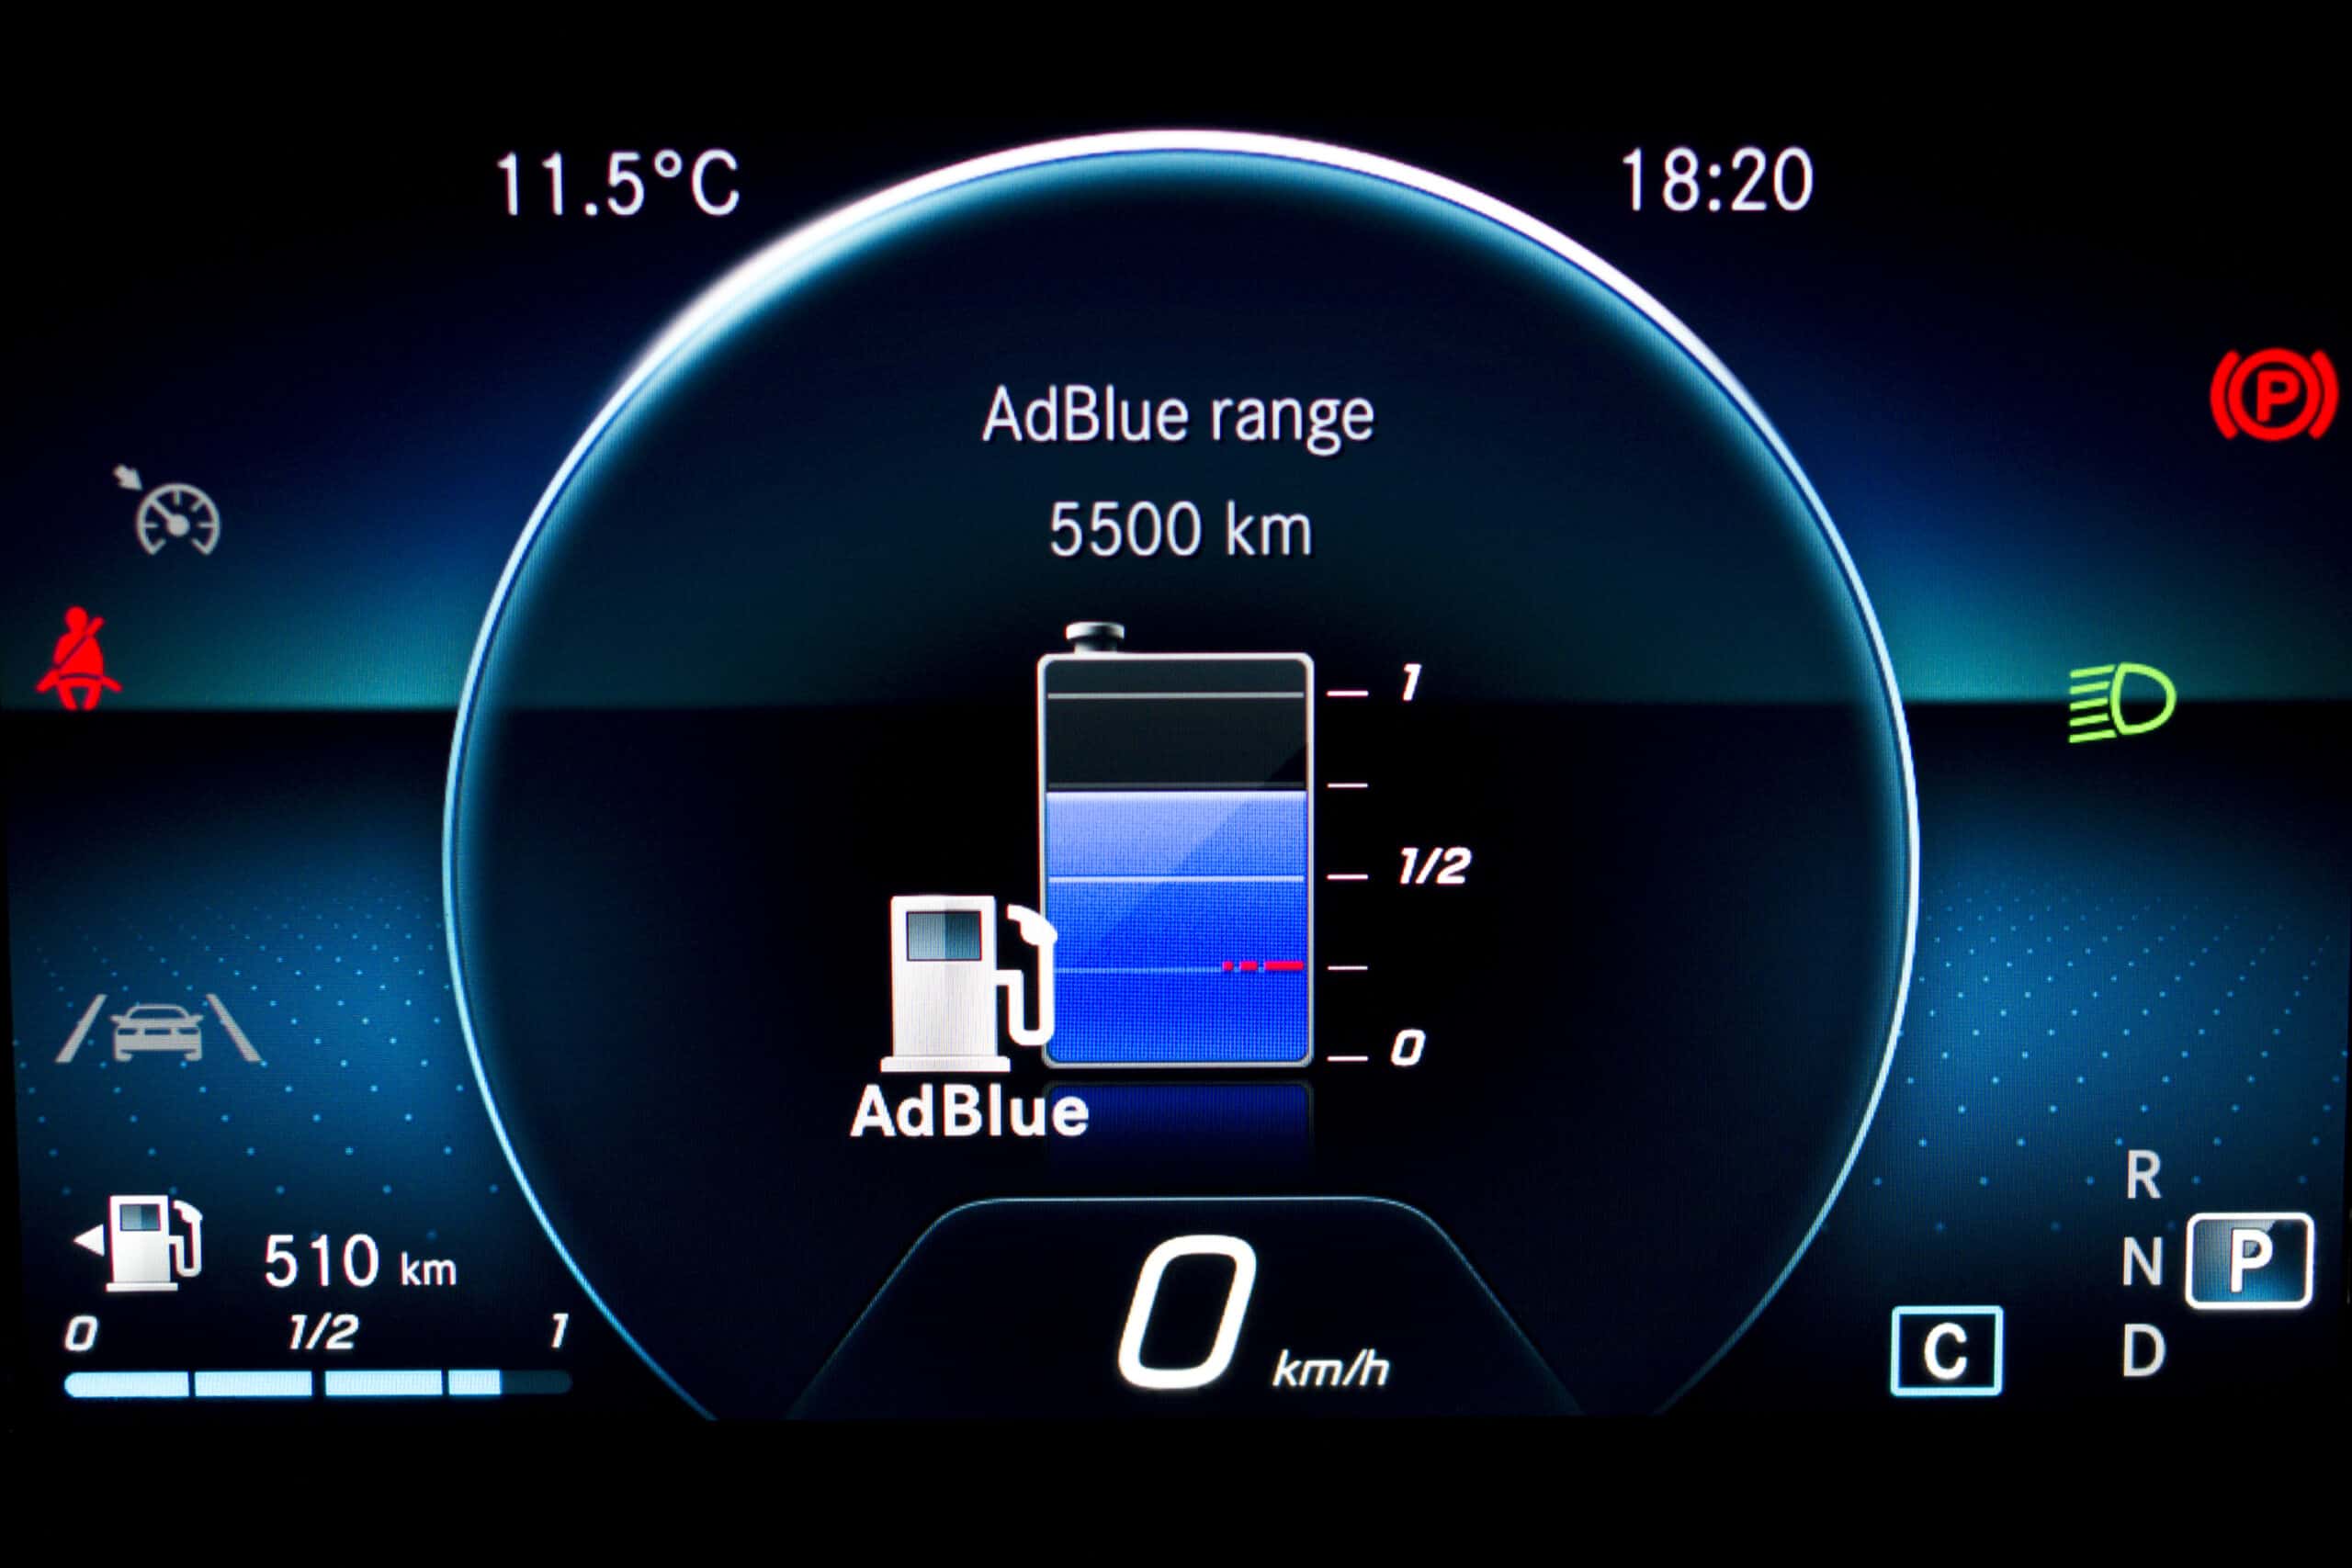 Close up of AdBlue level indicator on illuminated car dashboard. Car instrument panel with speedometer, fuel gauge and seat belt reminder. Urea level display on car cluster. Check diesel exhaust fluid